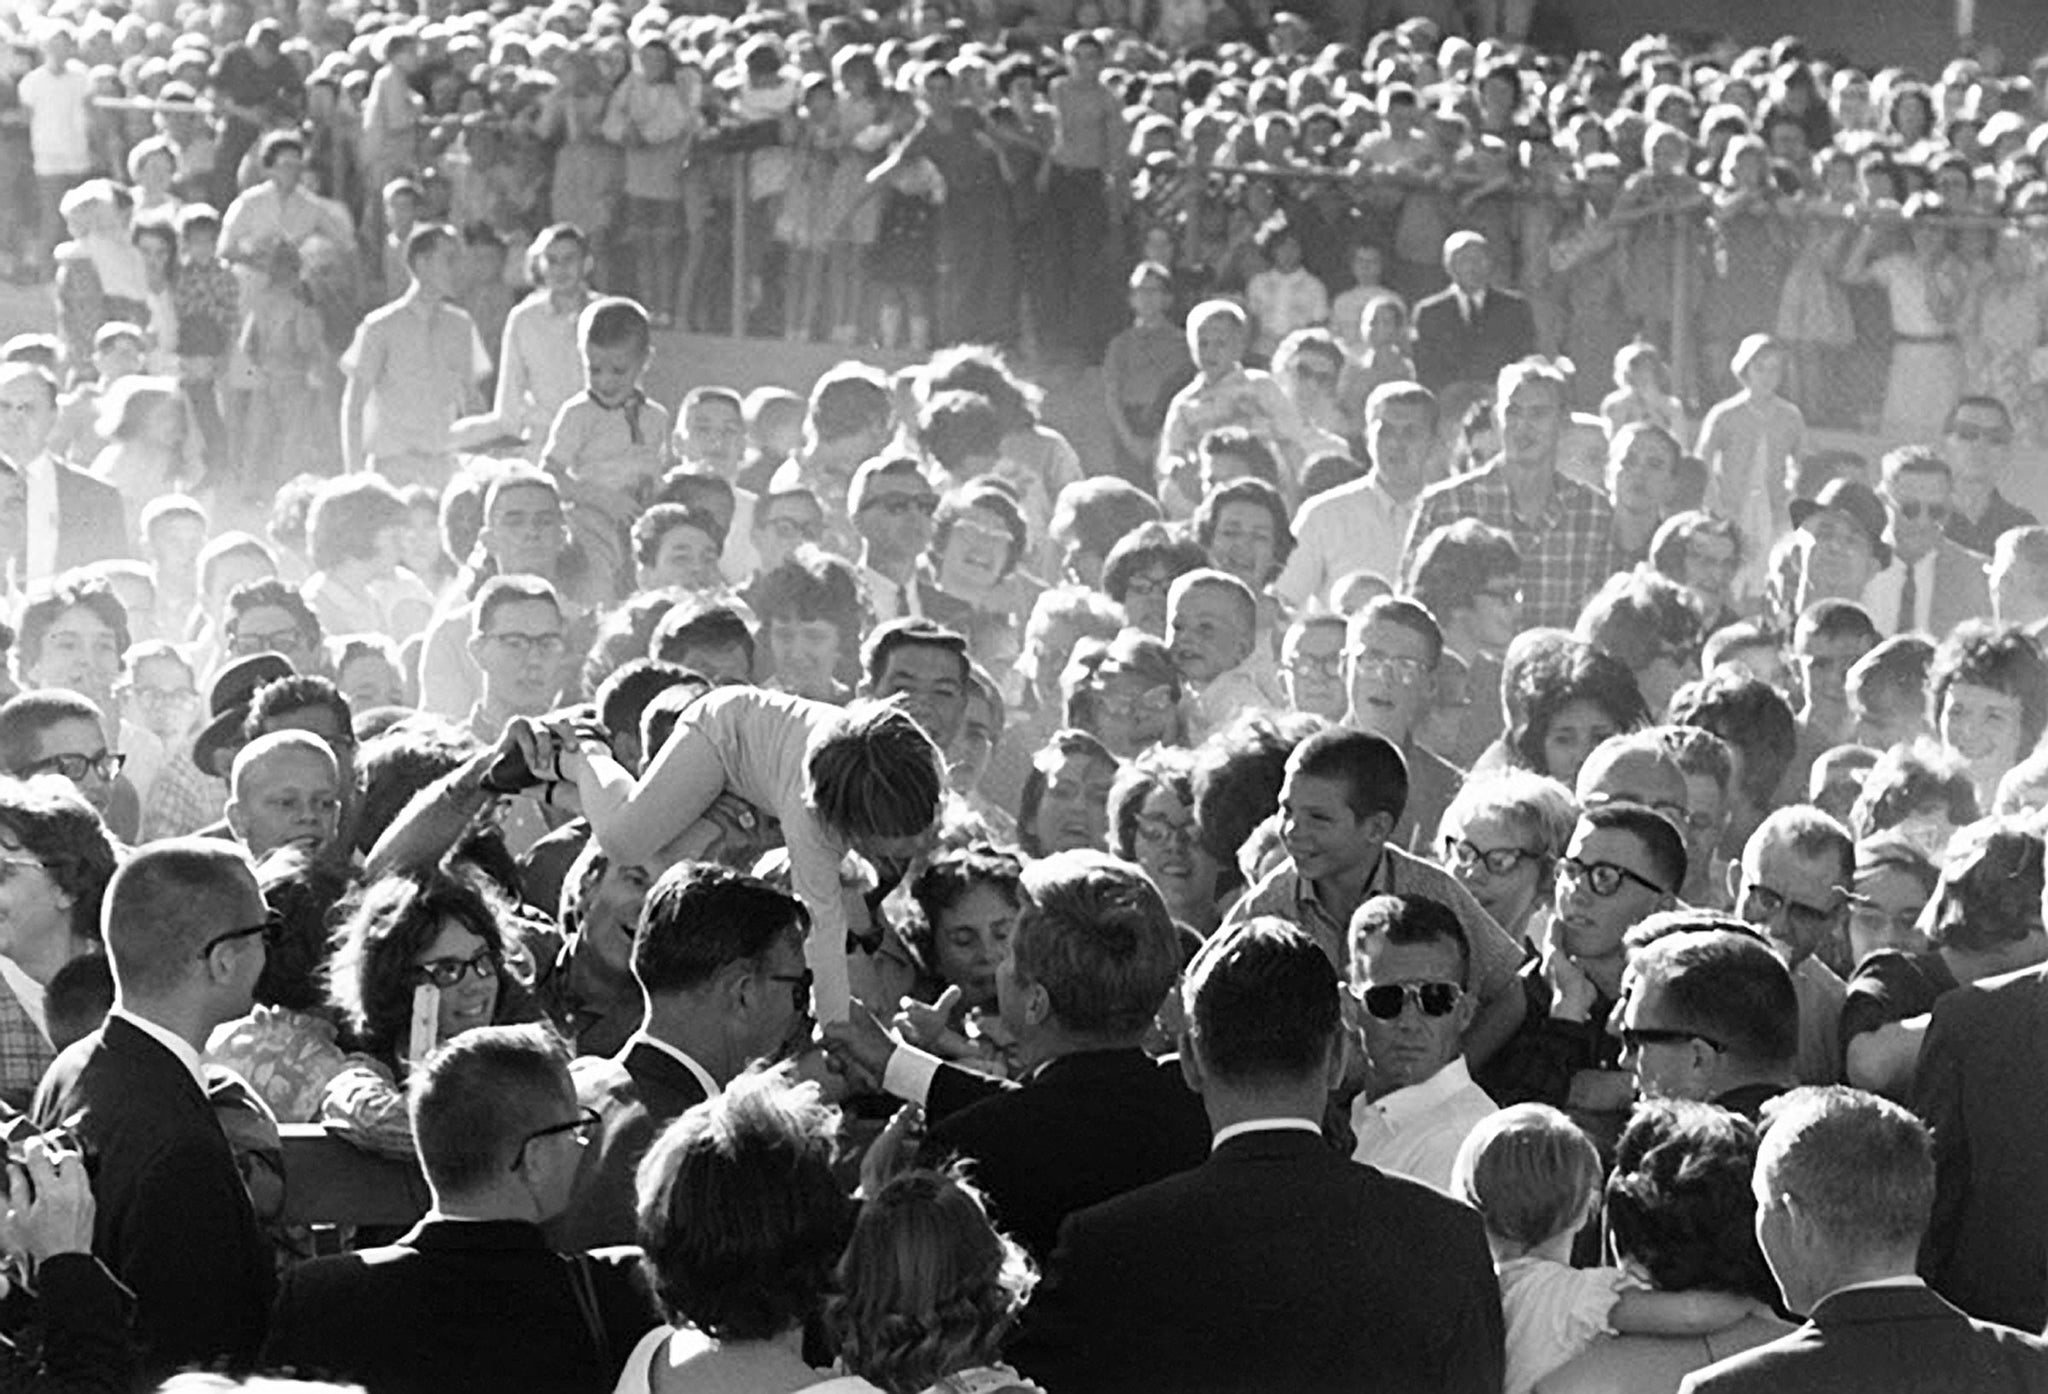 A young girl is lifted above the crowd to shake hands with President Kennedy during the President’s “Conservation Tour” of Western States, Billings, September 1963. -- COURTESY CECIL STOUGHTON